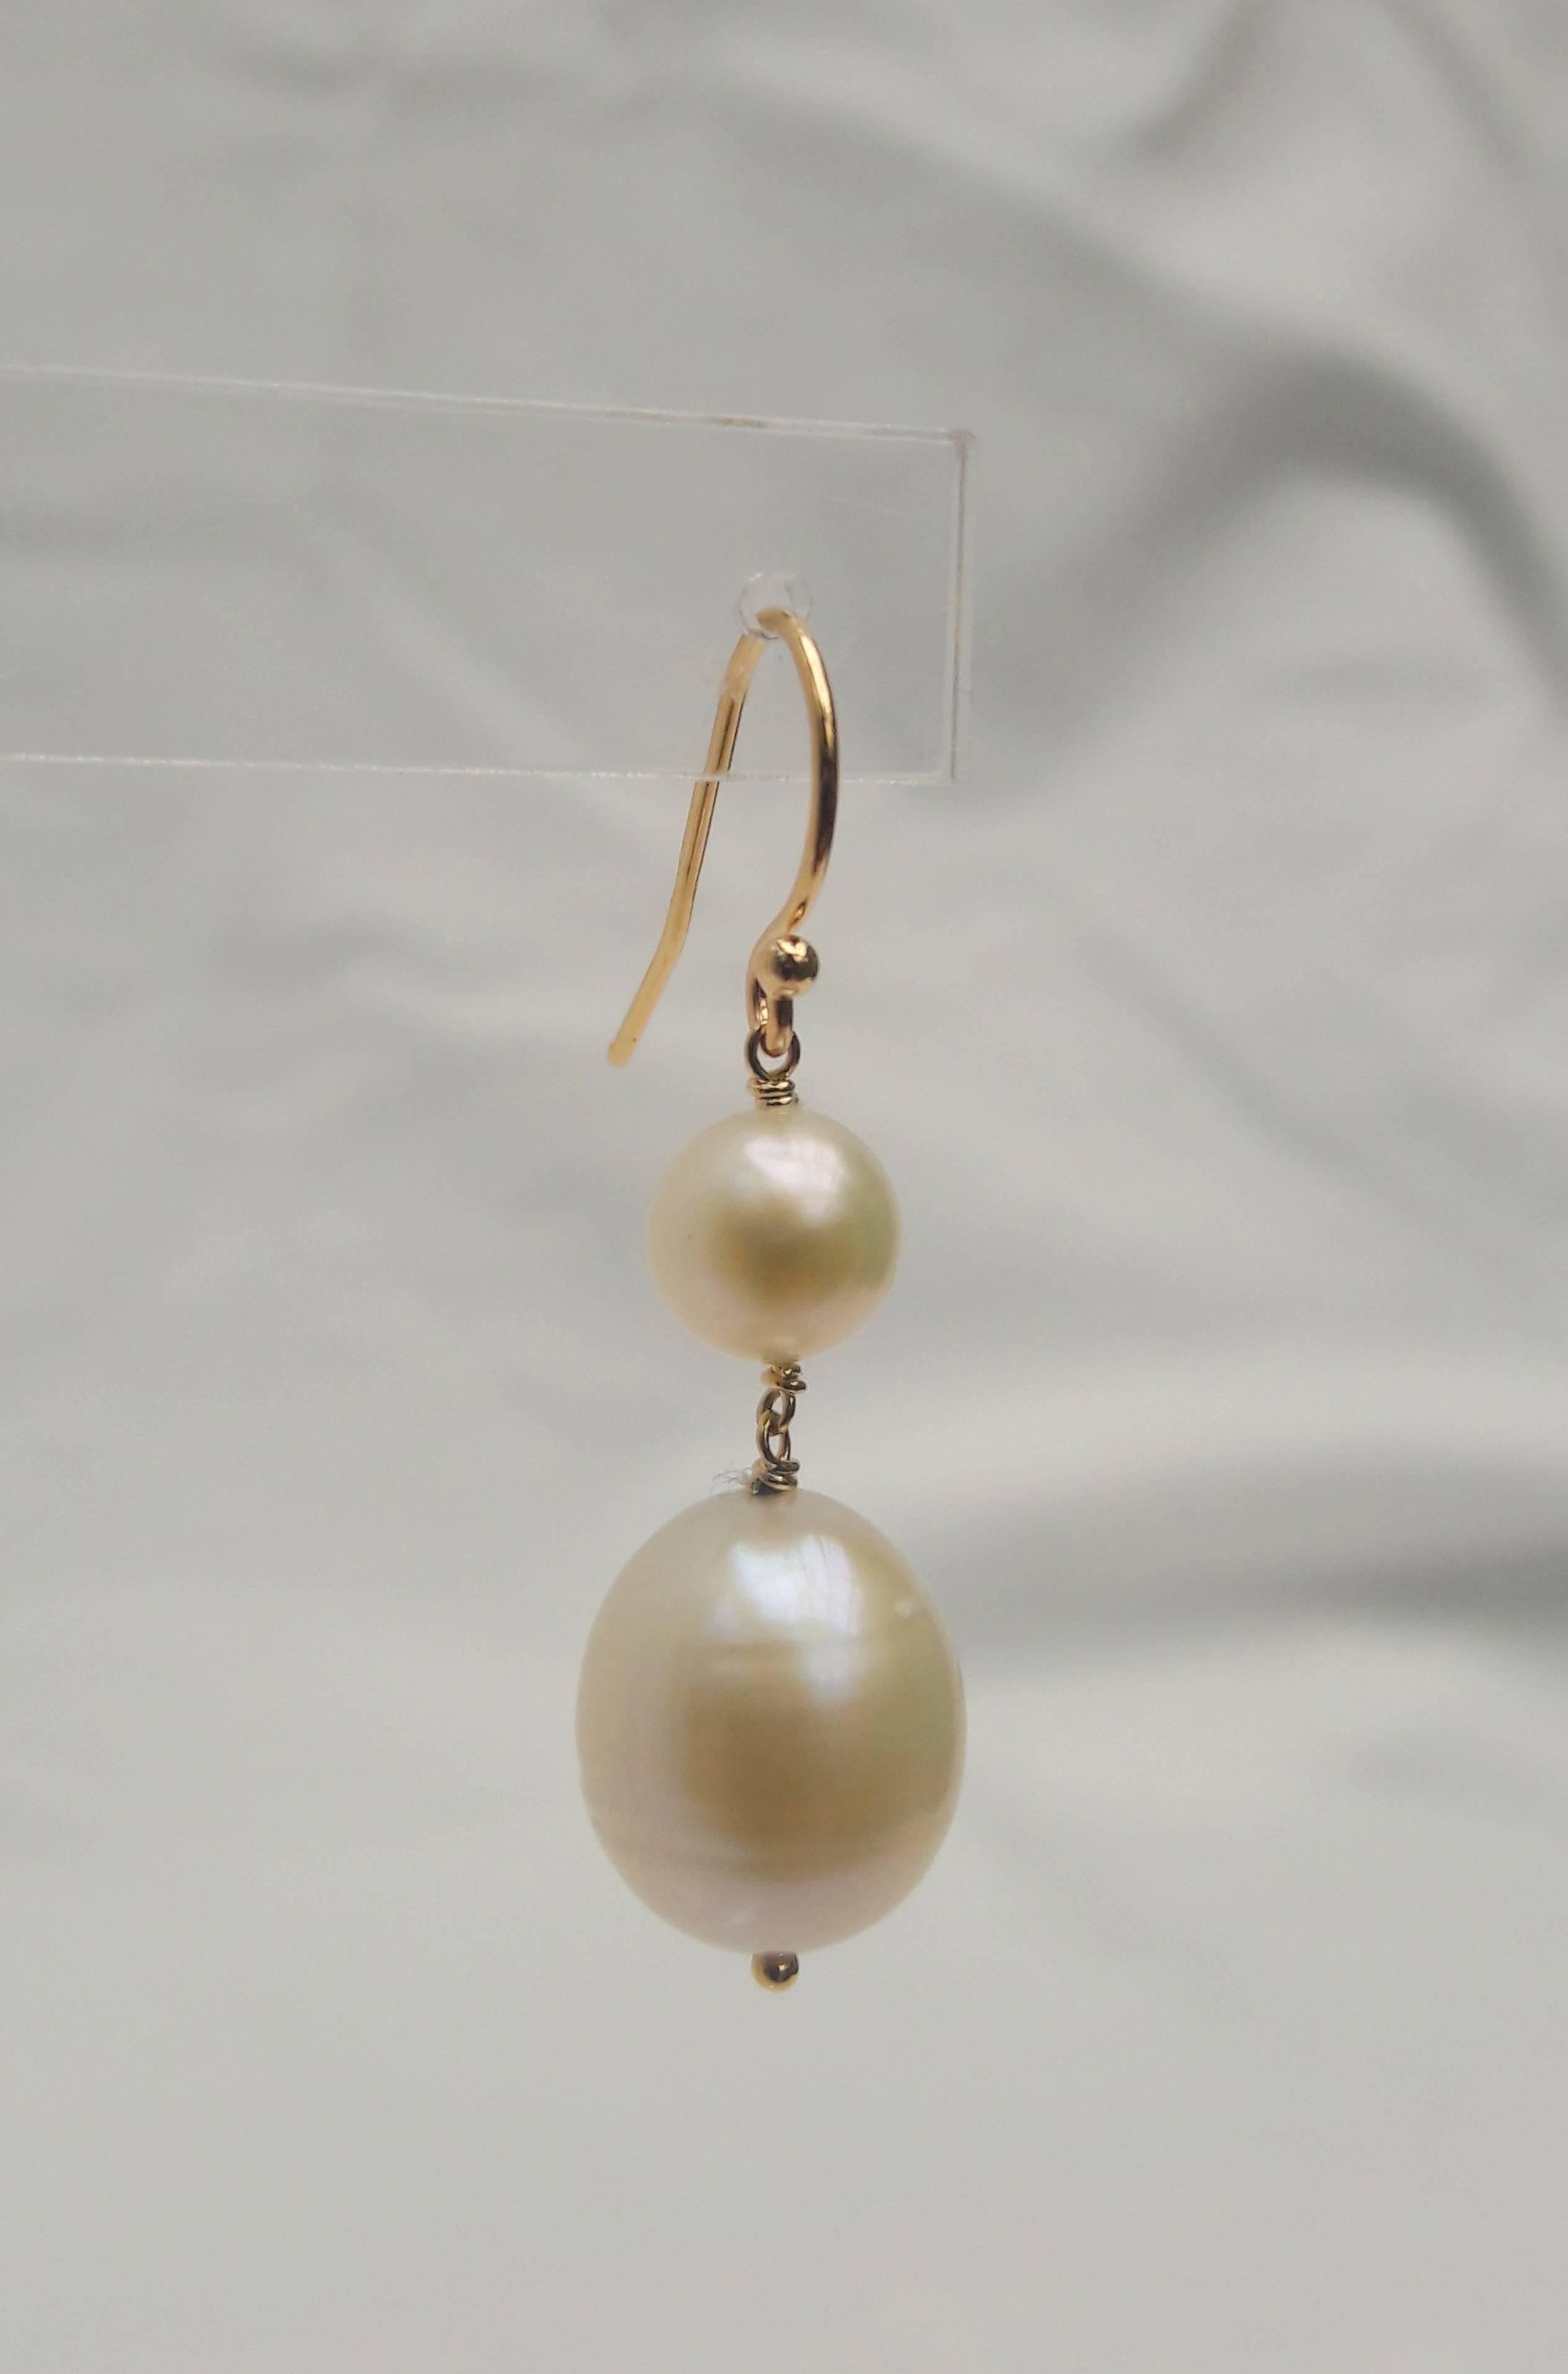 Bead Marina J. 6mm and 11mm White Pearl Gold Earrings For Sale